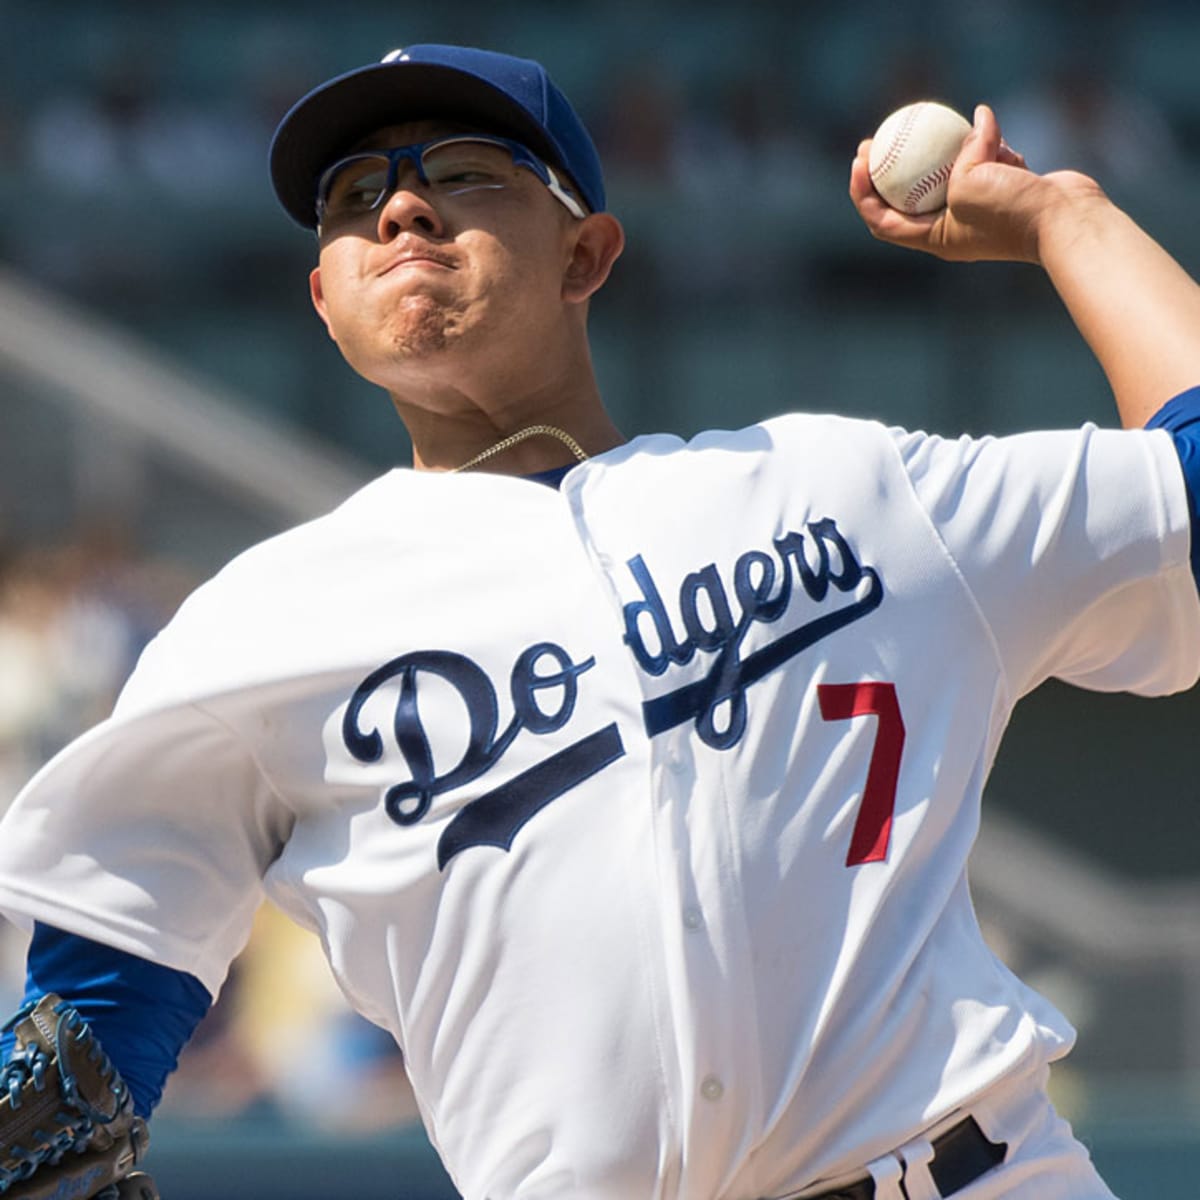 Dodgers Calling up 19-Year-Old Pitching Prodigy Julio Urias